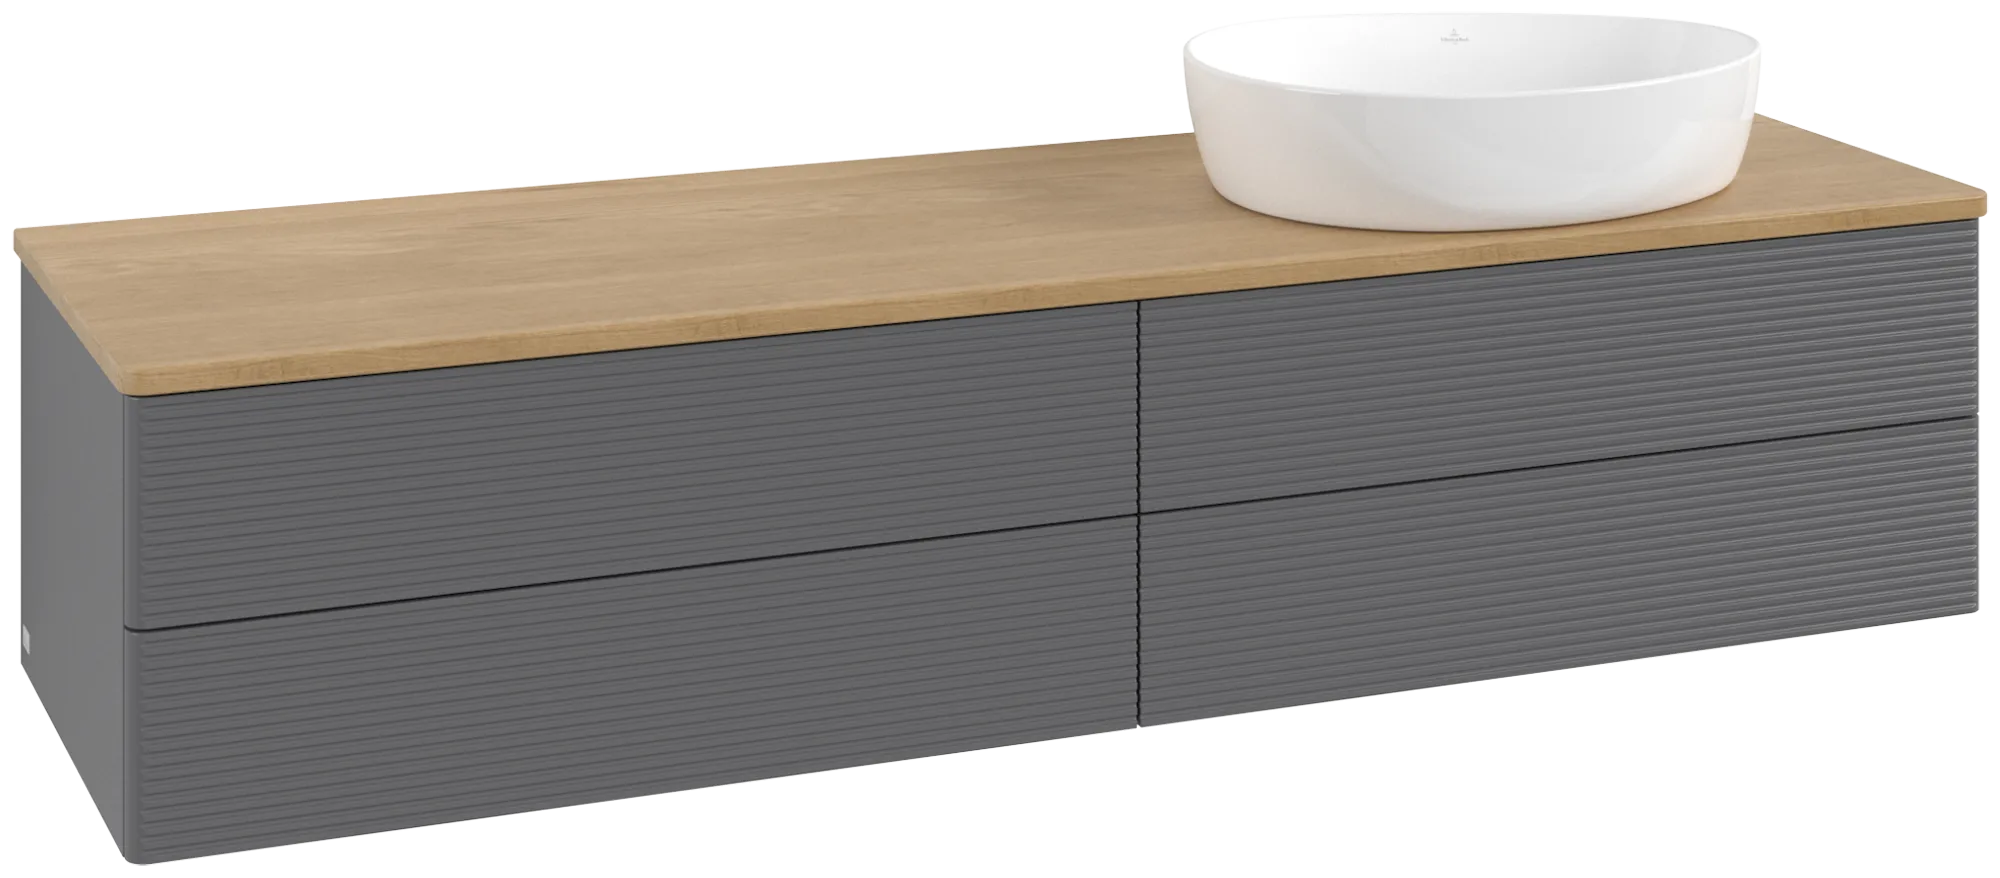 Picture of VILLEROY BOCH Antao Vanity unit, 4 pull-out compartments, 1600 x 360 x 500 mm, Front with grain texture, Anthracite Matt Lacquer / Honey Oak #K27111GK